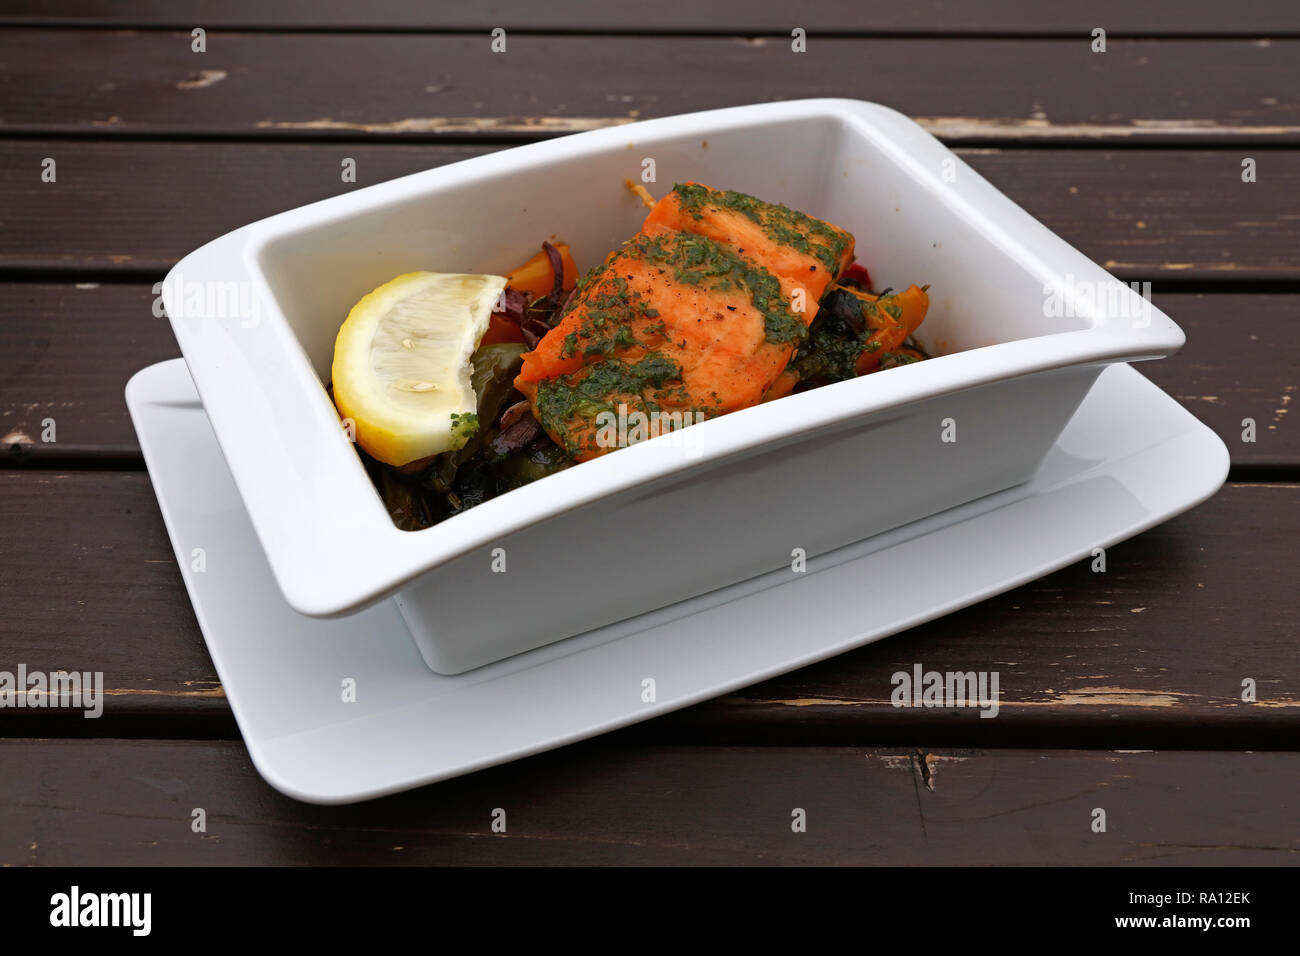 Close up portion of baked or roasted salmon with vegetables in white bowl over table, elevated top view, directly above Stock Photo